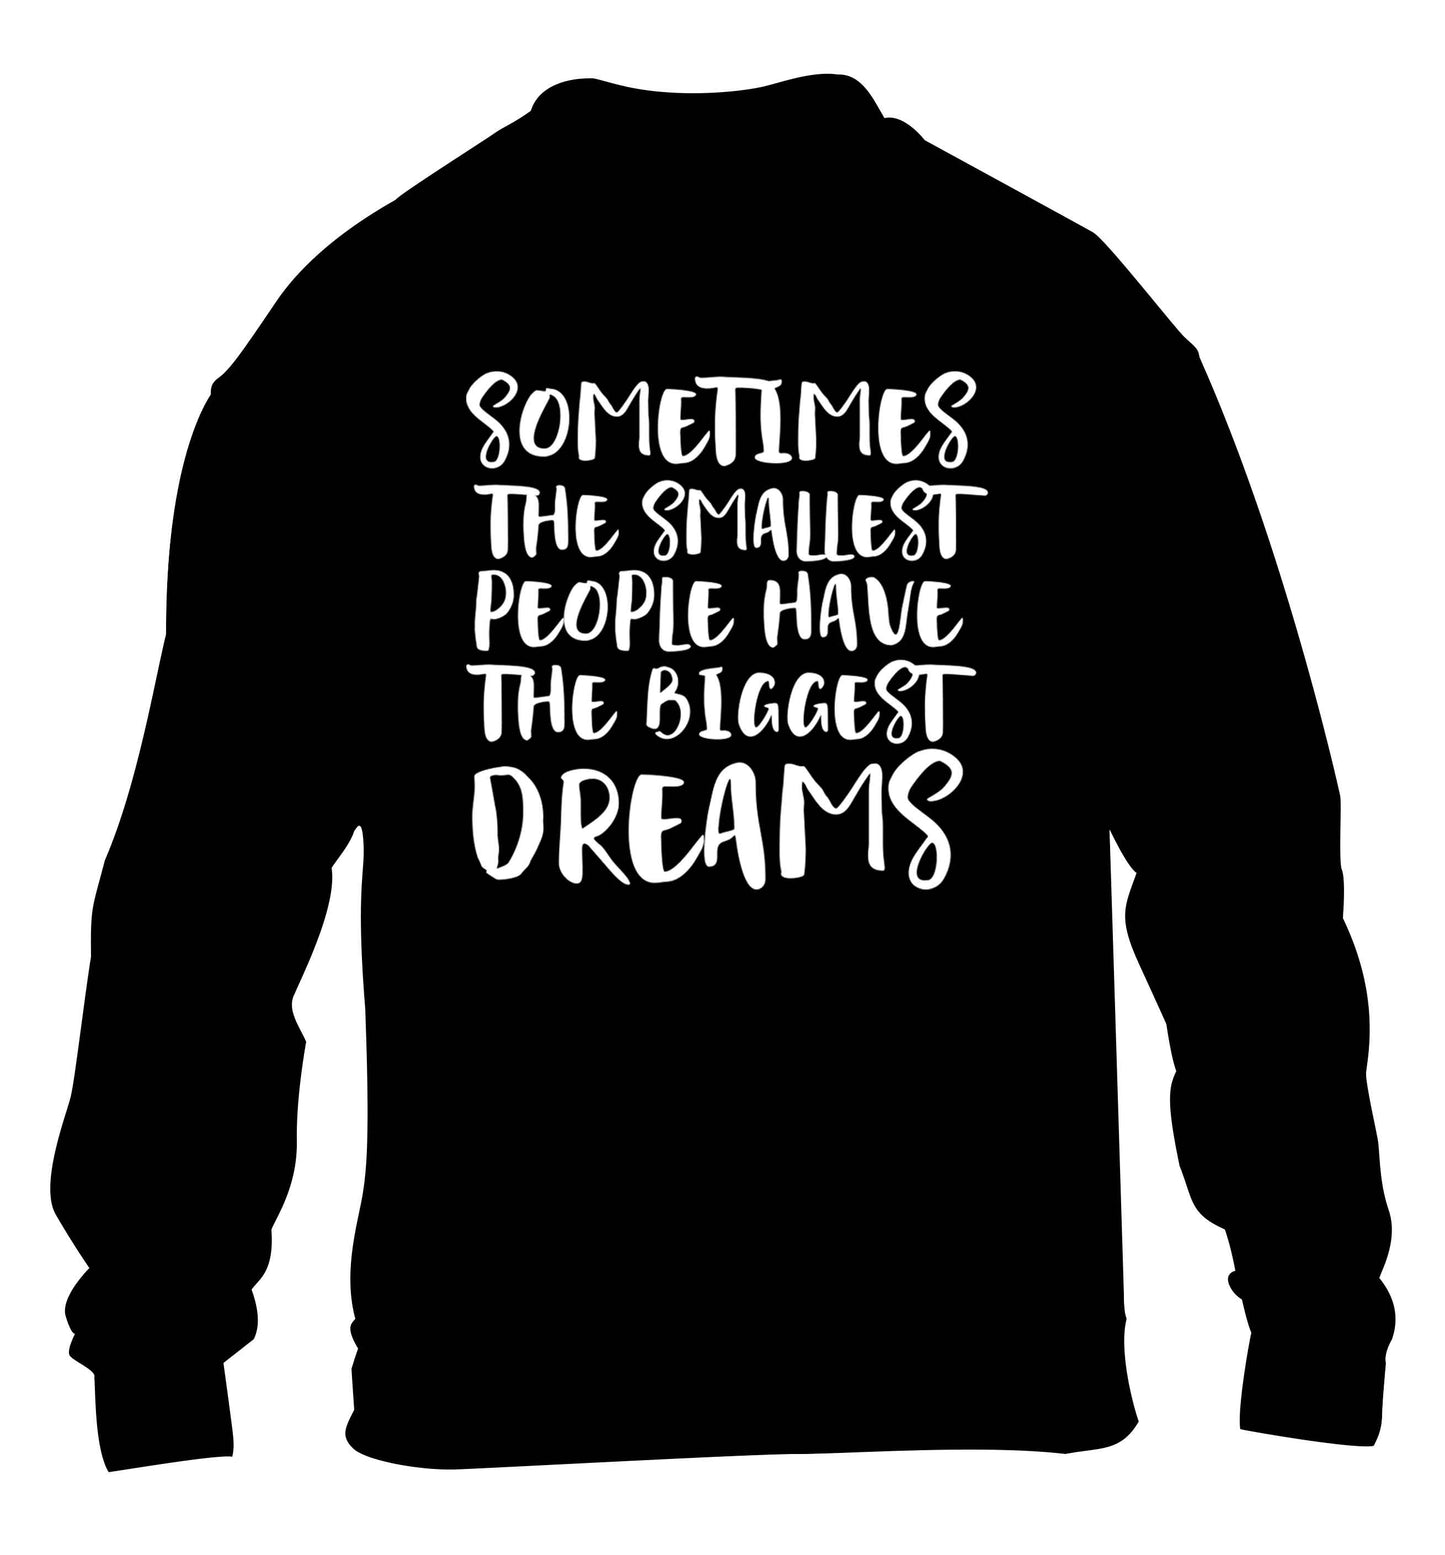 Sometimes the smallest people have the biggest dreams children's black sweater 12-13 Years